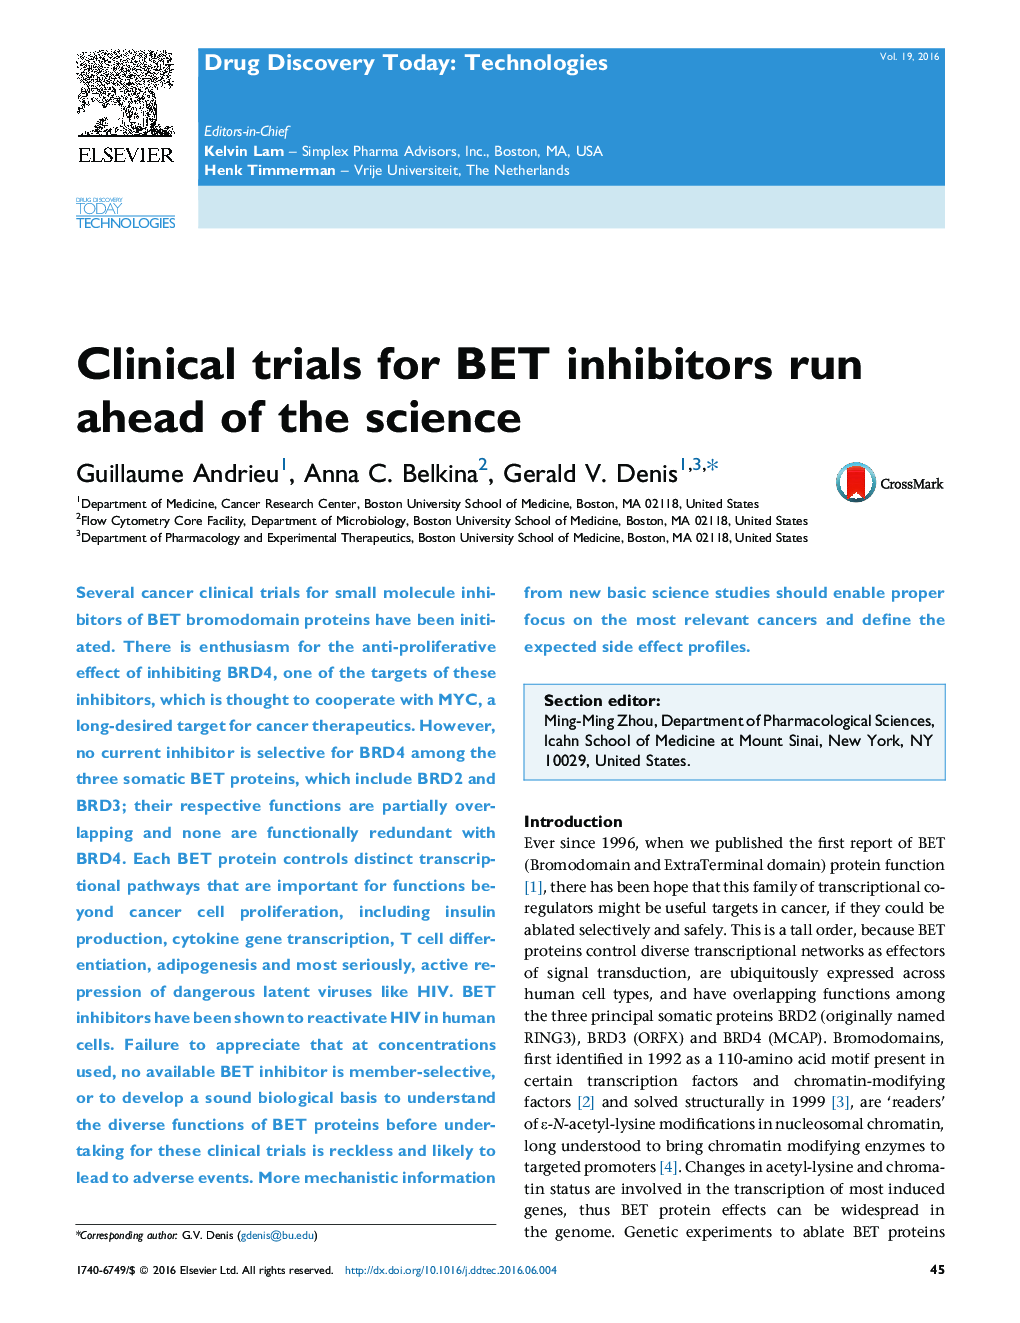 Clinical trials for BET inhibitors run ahead of the science